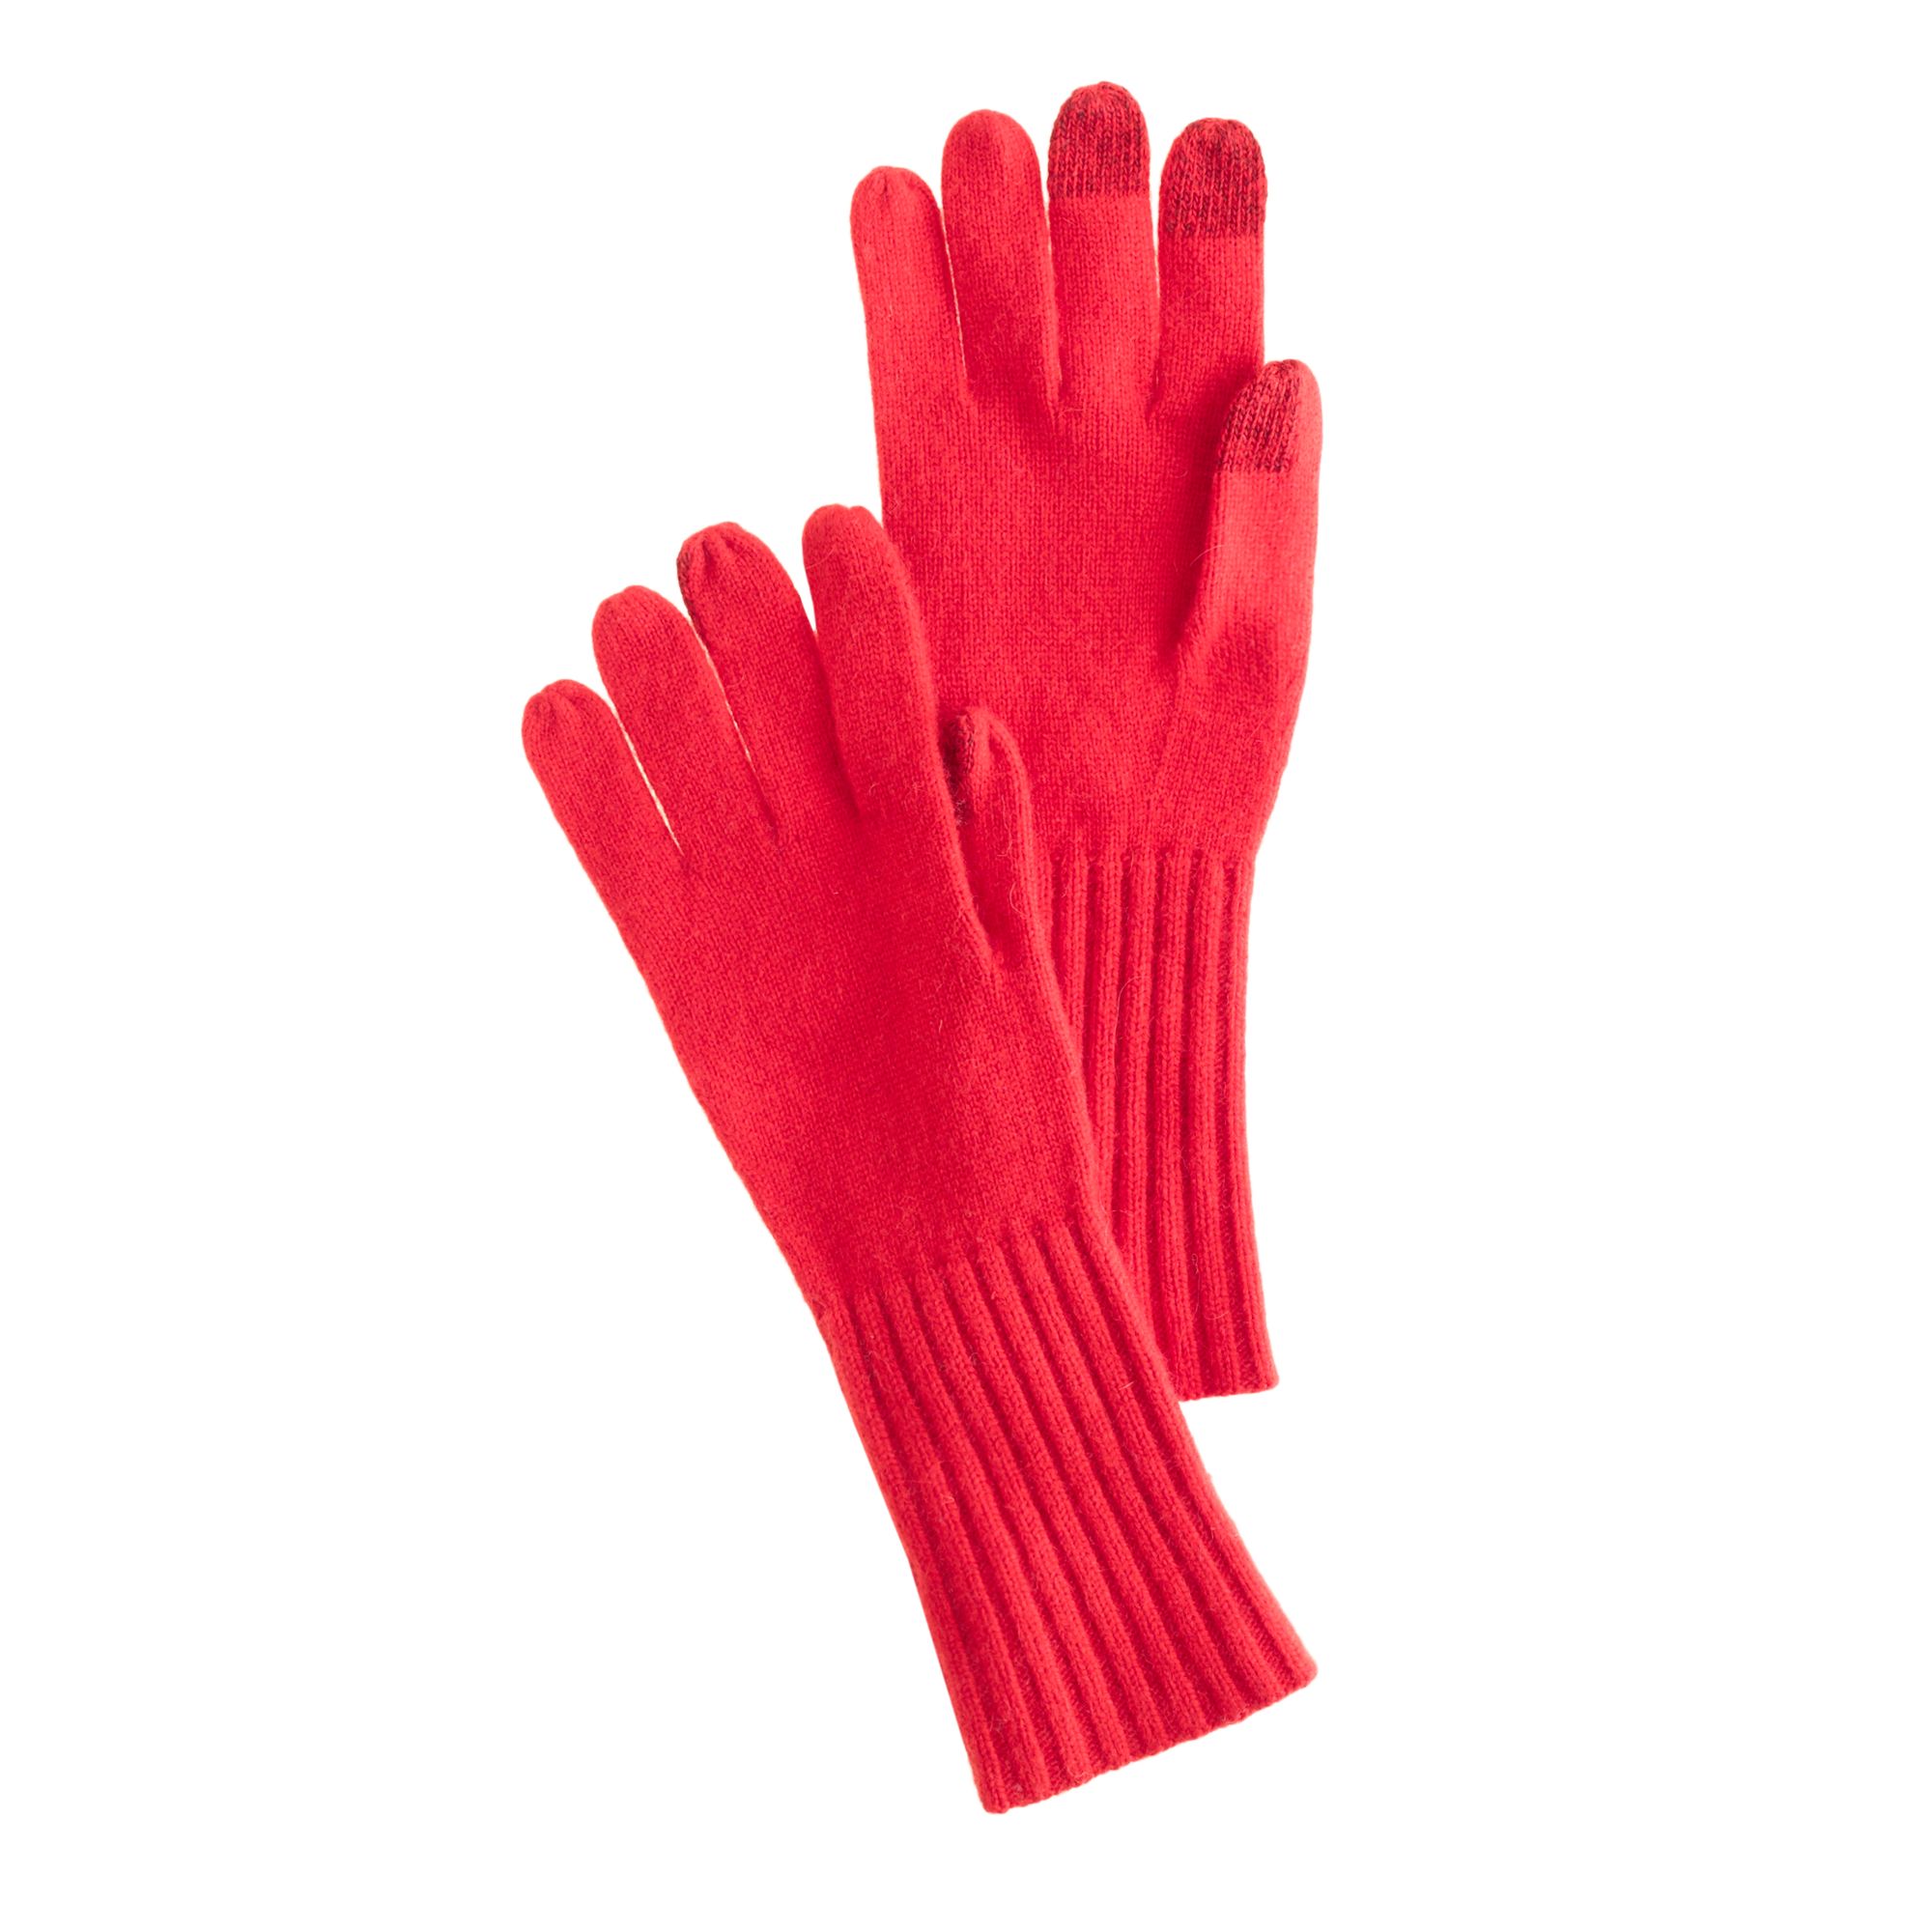 Lyst - J.Crew Womens Smartphone Wool Gloves in Red